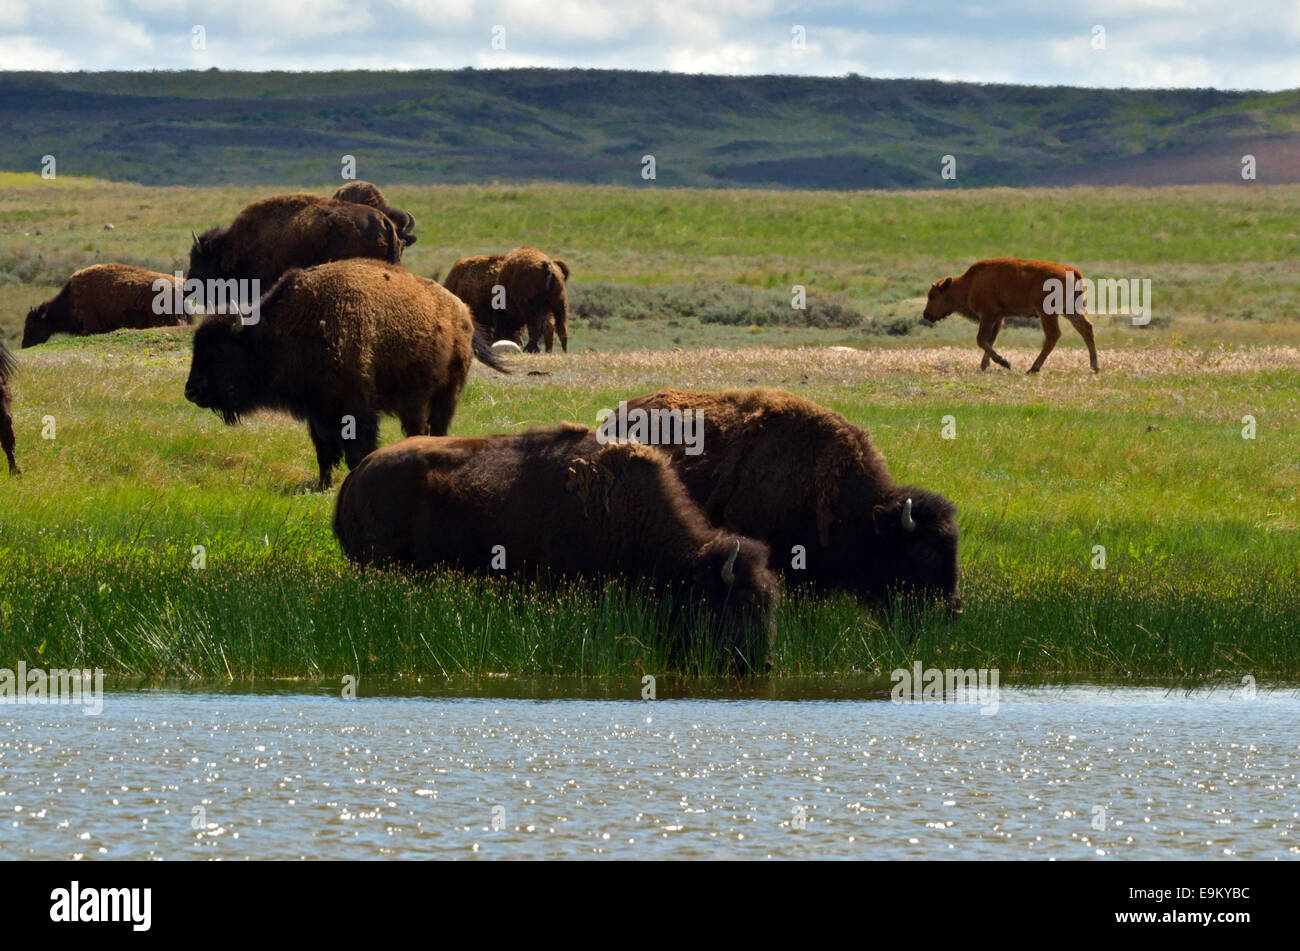 Bison drinking at a wetland pond in the Great Plains of Montana at American Prairie Reserve. South of Malta, Montana. Stock Photo